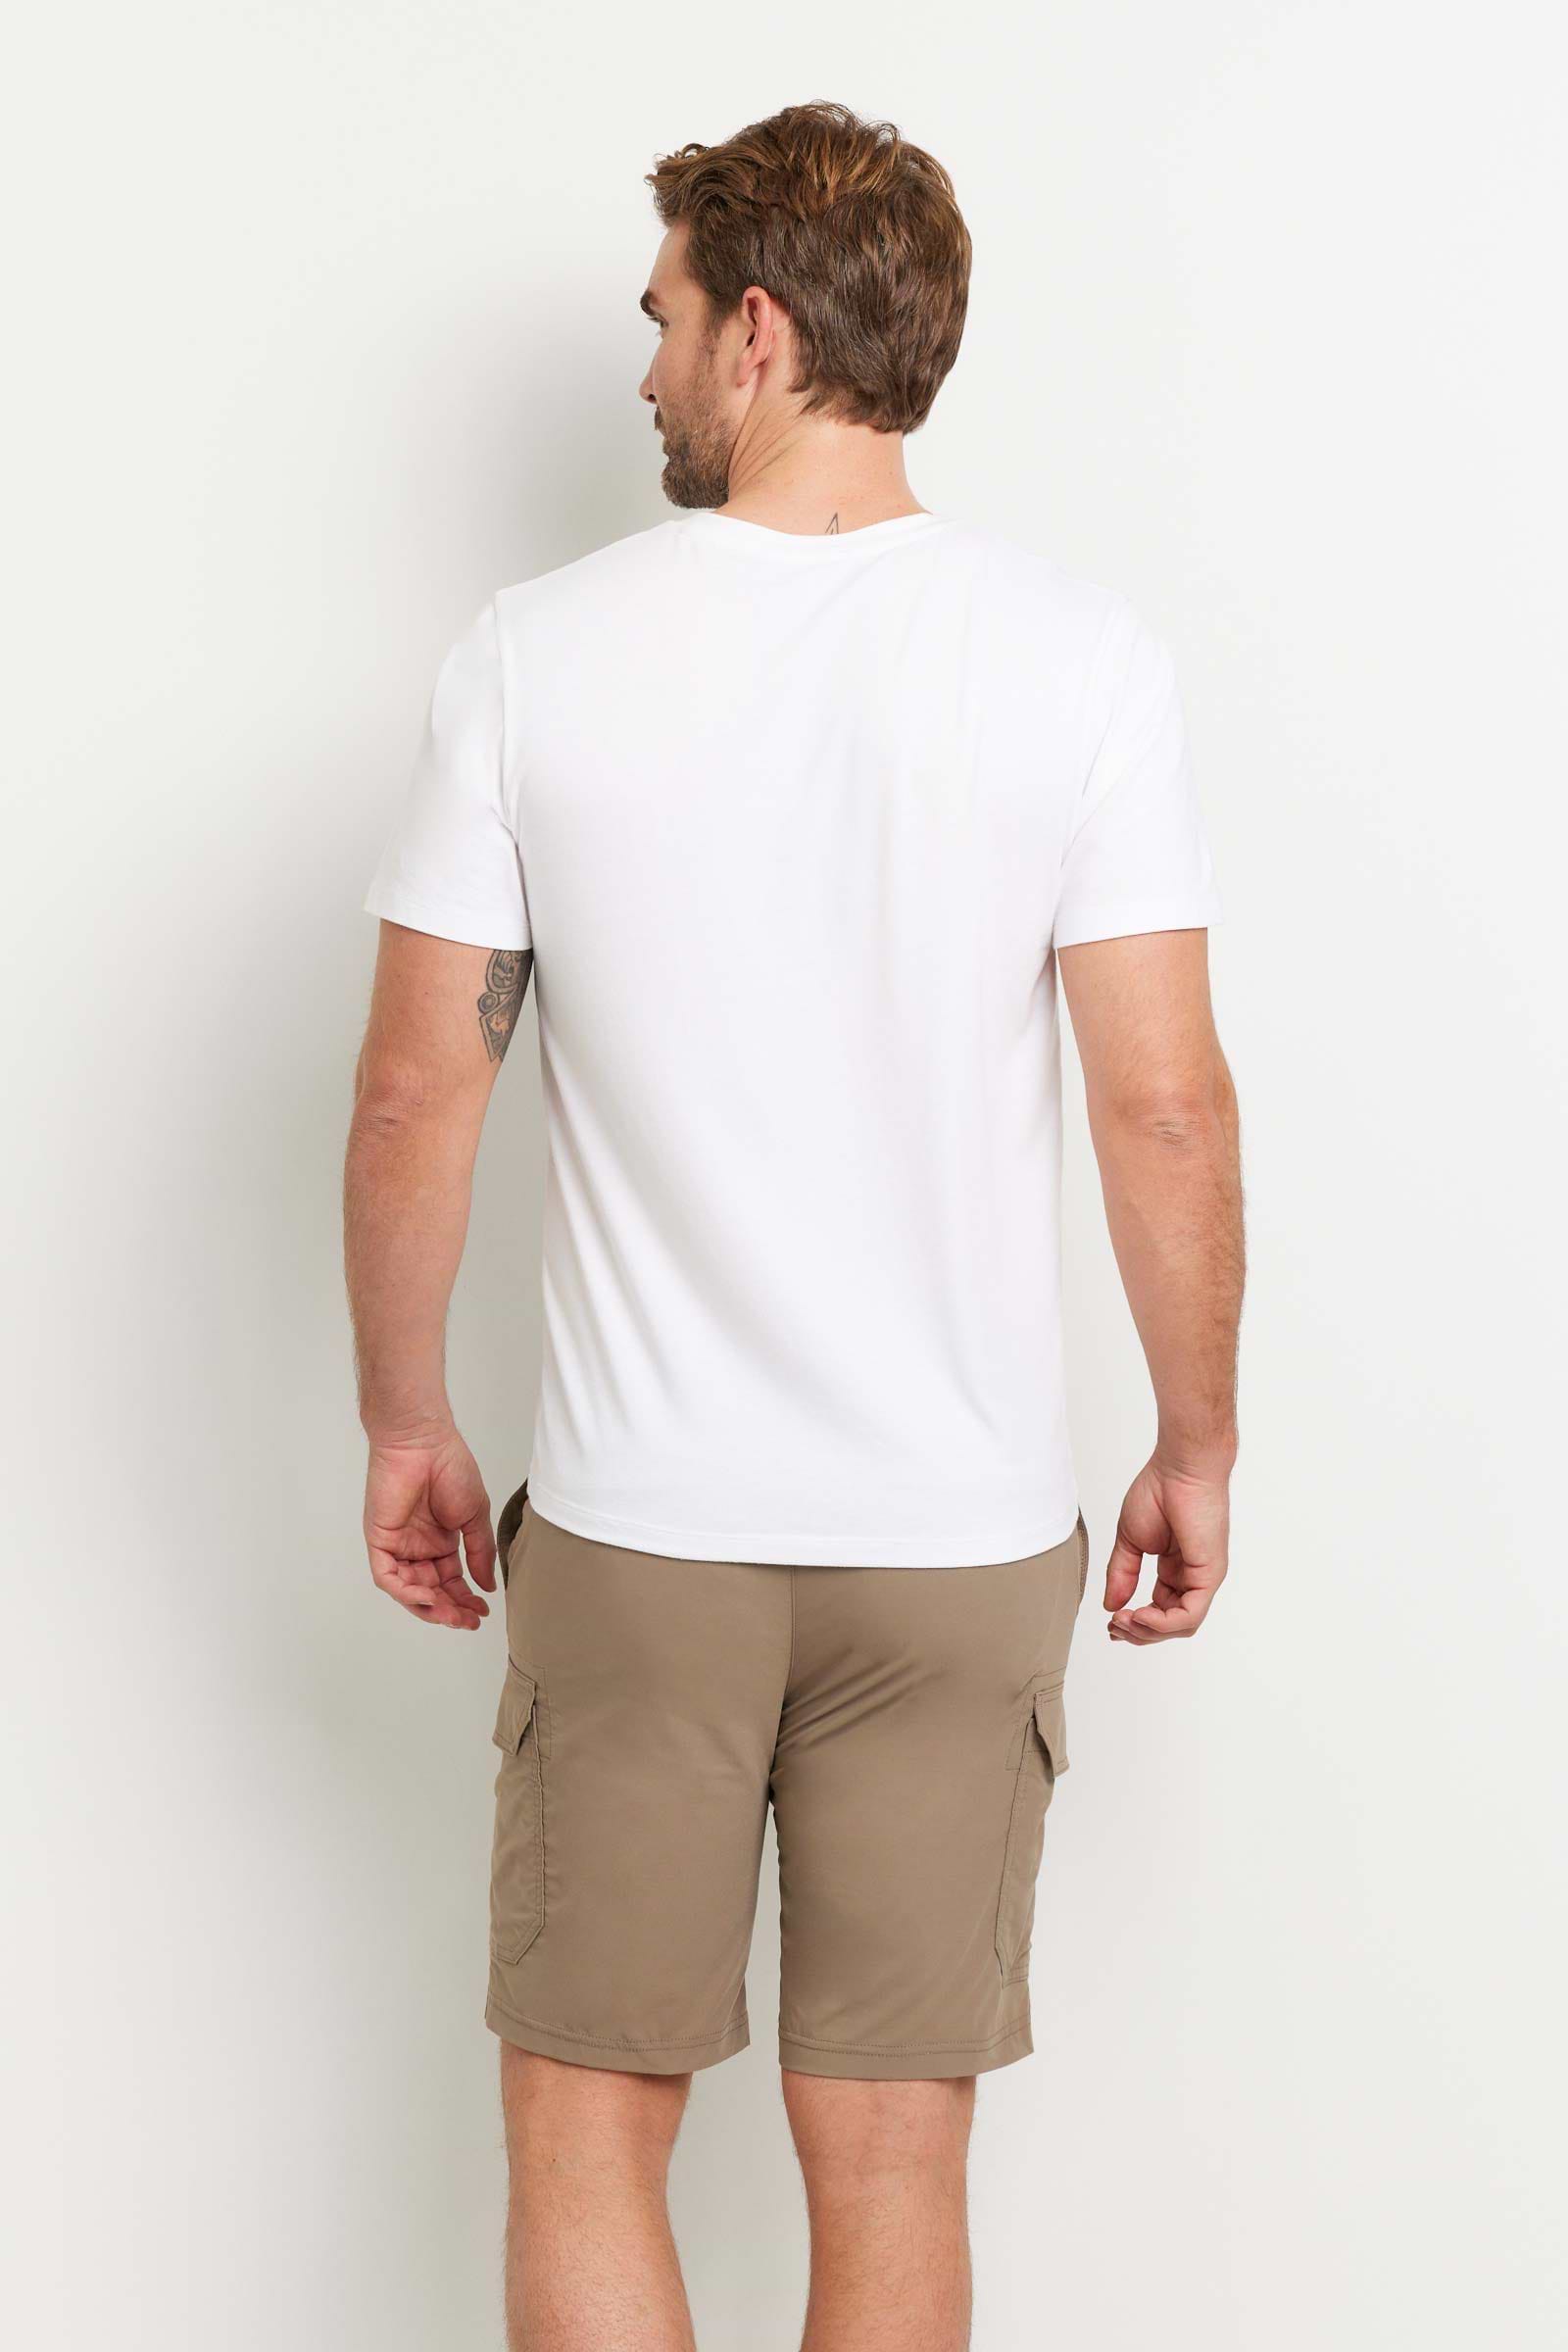 The Best Travel Top. Man Showing the Back Profile of a Men's Vince Top in White.